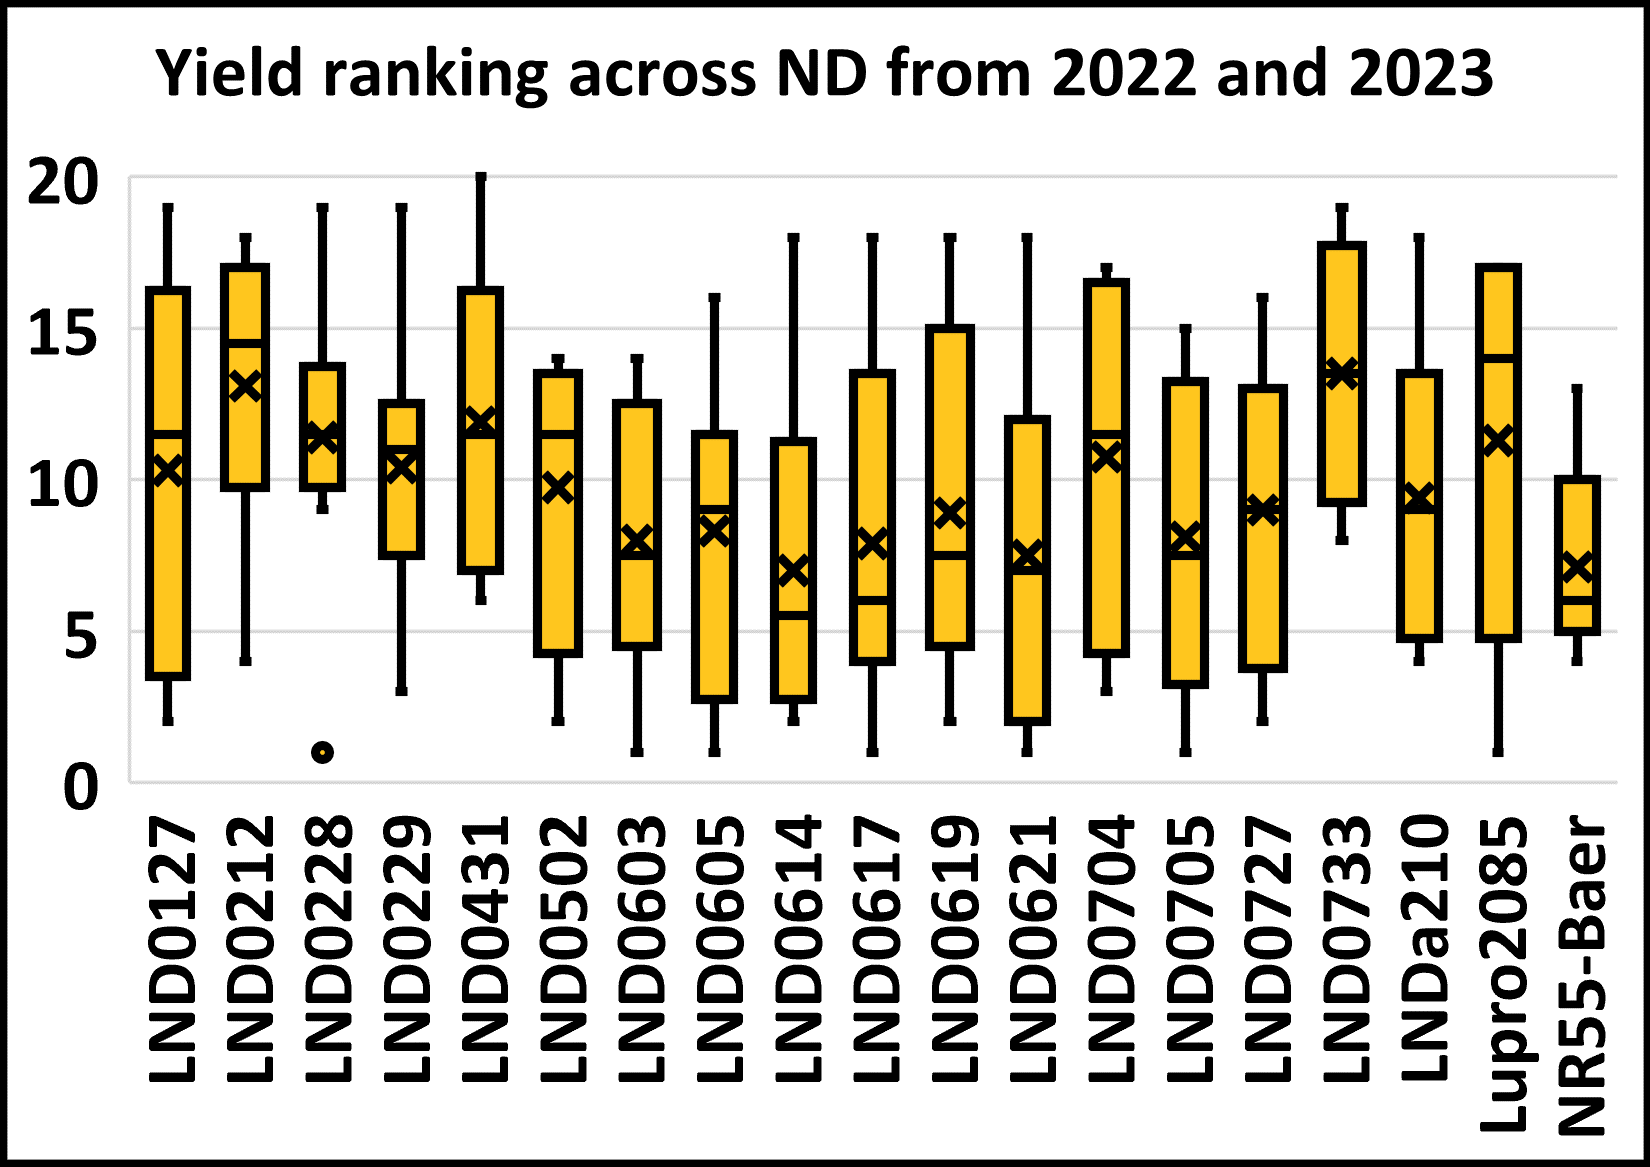 A graph showing the yield ranking of advanced lupin selections across North Dakota in 2022 and 2023.